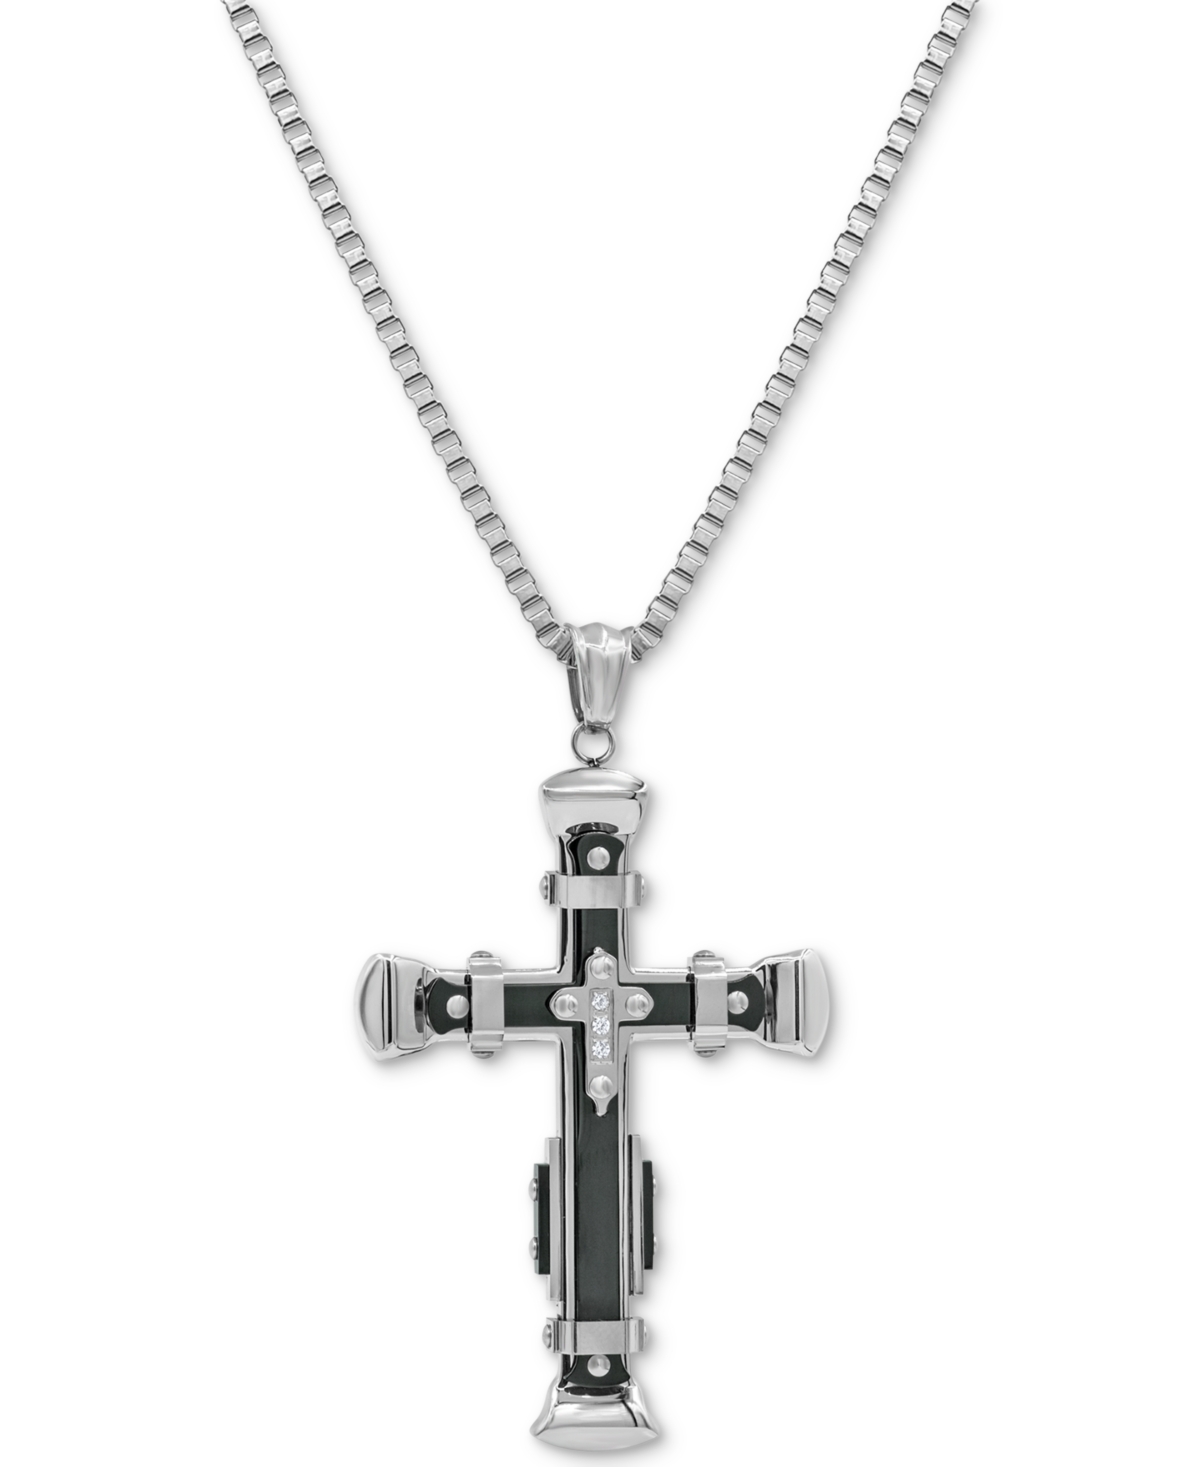 Men's Cubic Zirconia Two-Tone Cross 24" Pendant Necklace in Stainless Steel & Black Ion-Plate - Two-Tone